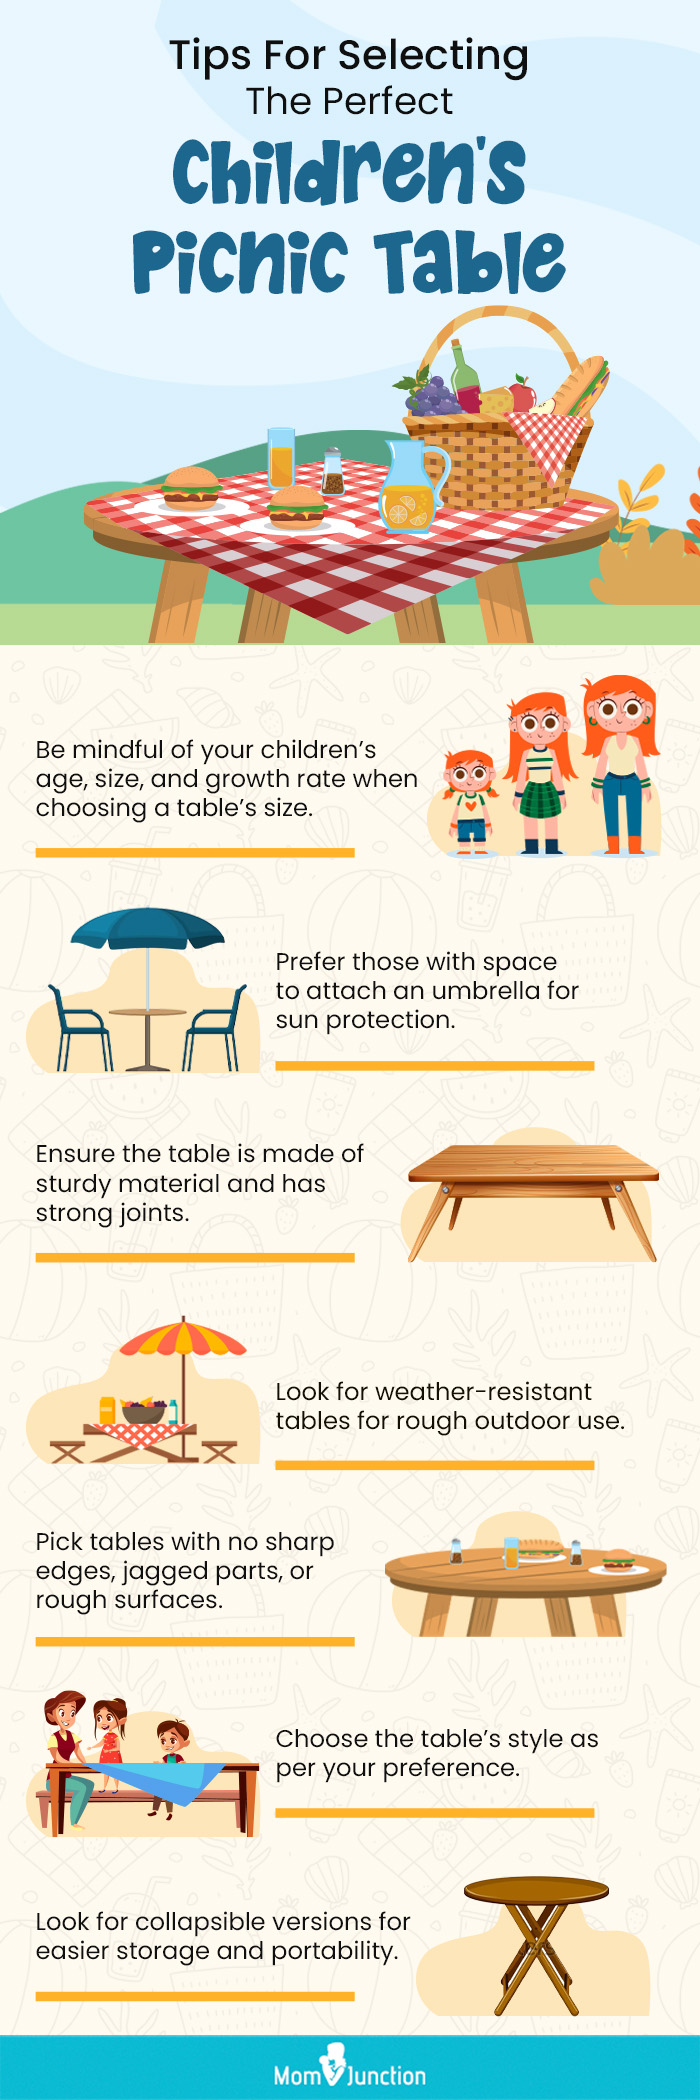 Tips For Selecting The Perfect Children’s Picnic Table (infographic)